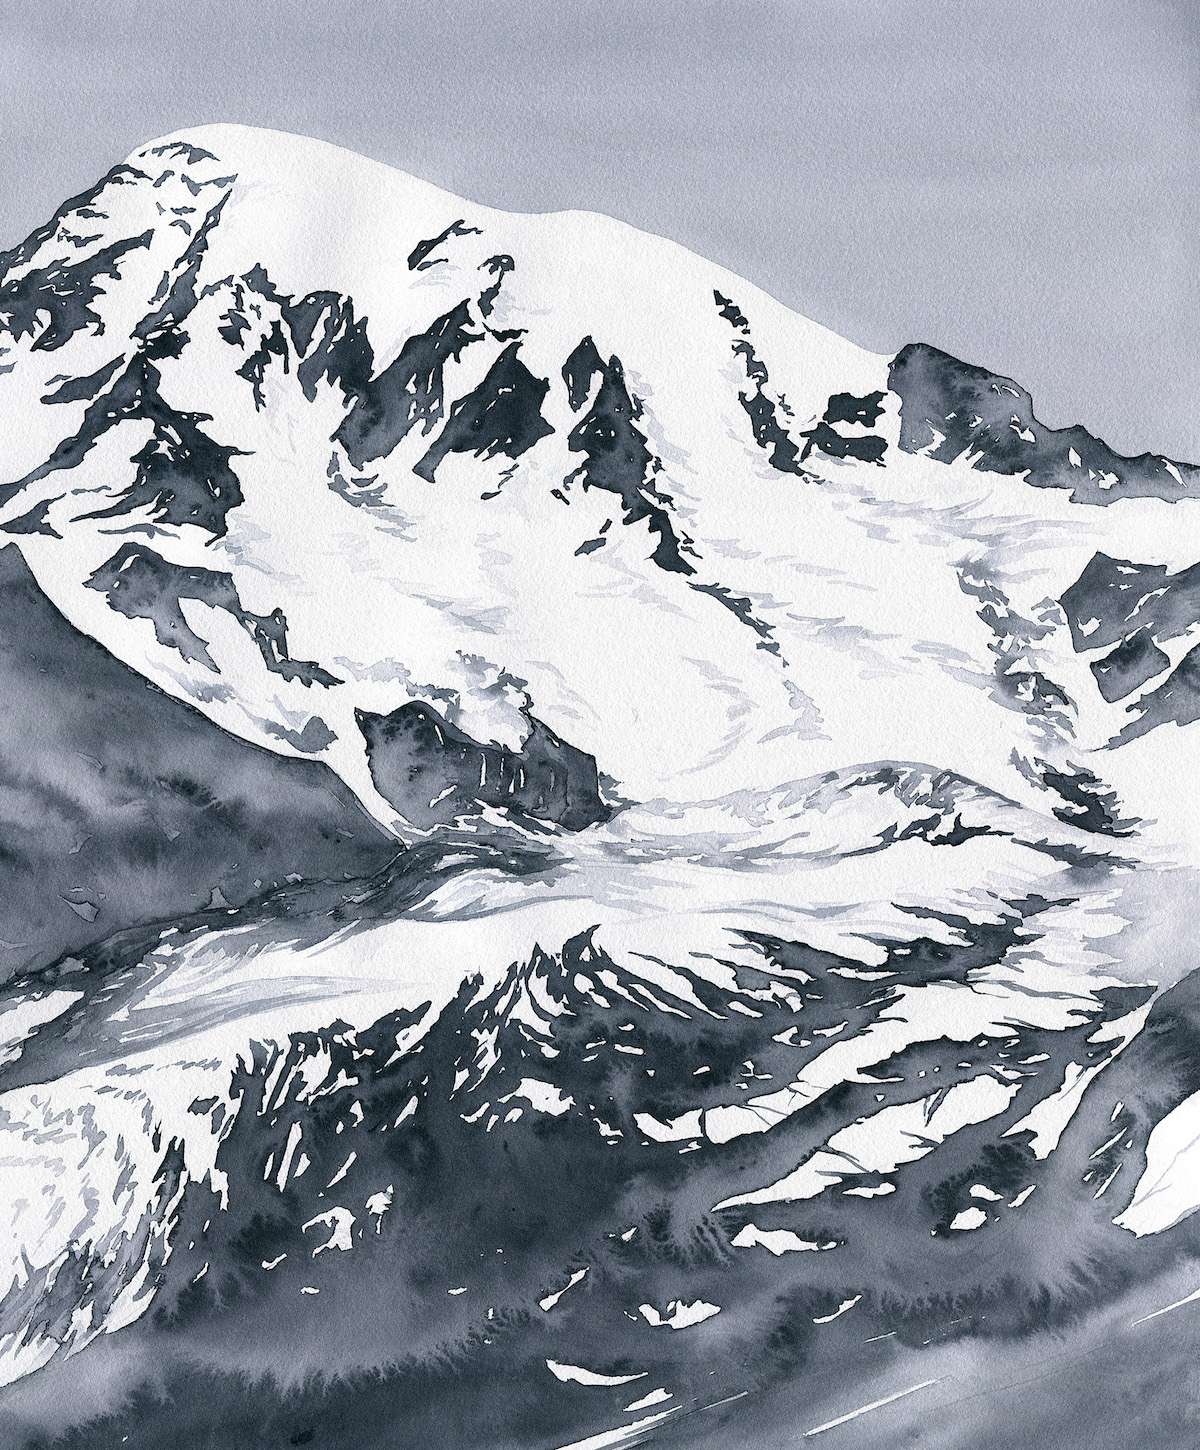 [1 of 2] Mt. Rainier, 1890 vs. 2018. The artist recounts: These paintings illustrate the recession of the Nisqually Glacier from 1890 to 2018. The 1890 painting is based on an image found in a photographic analysis by Fred Veatch. According to geomorphologist Paul Kennard, the Nisqually Glacier is losing up to a quarter mile of length each year. [Artwork] Claire Giordano